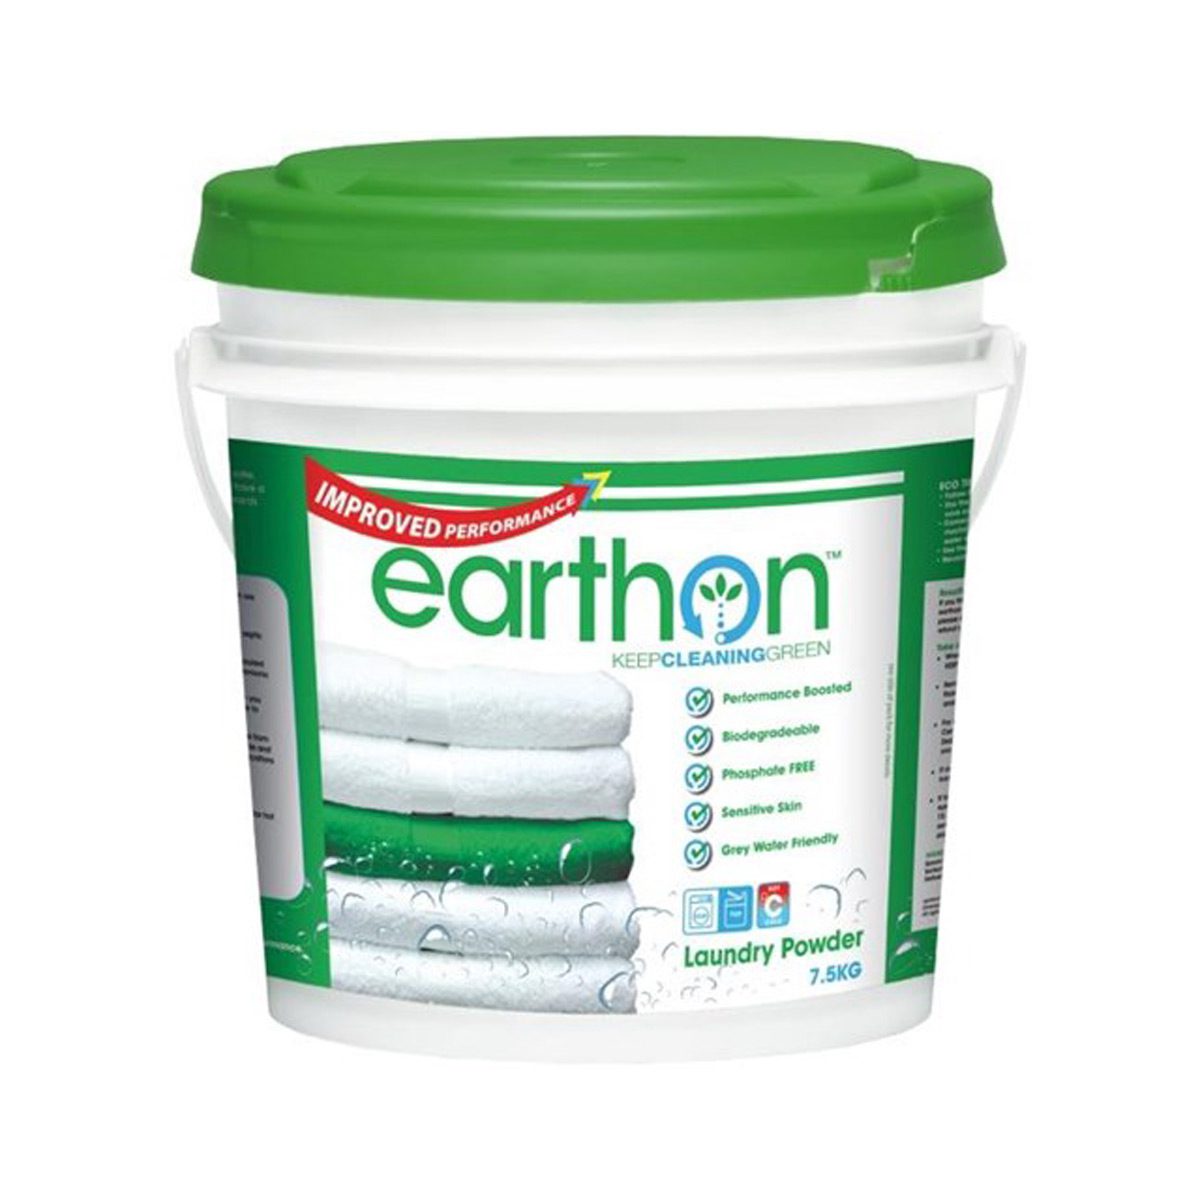 cleaning-products-laundry-earthon-laundry-powder-front-and-top-loader-7.5kg-bio-degradable-grey-water-friendly-suitable-for-top-or-front-loaders-for-sensitive-skin-vjs-distributors-5013134